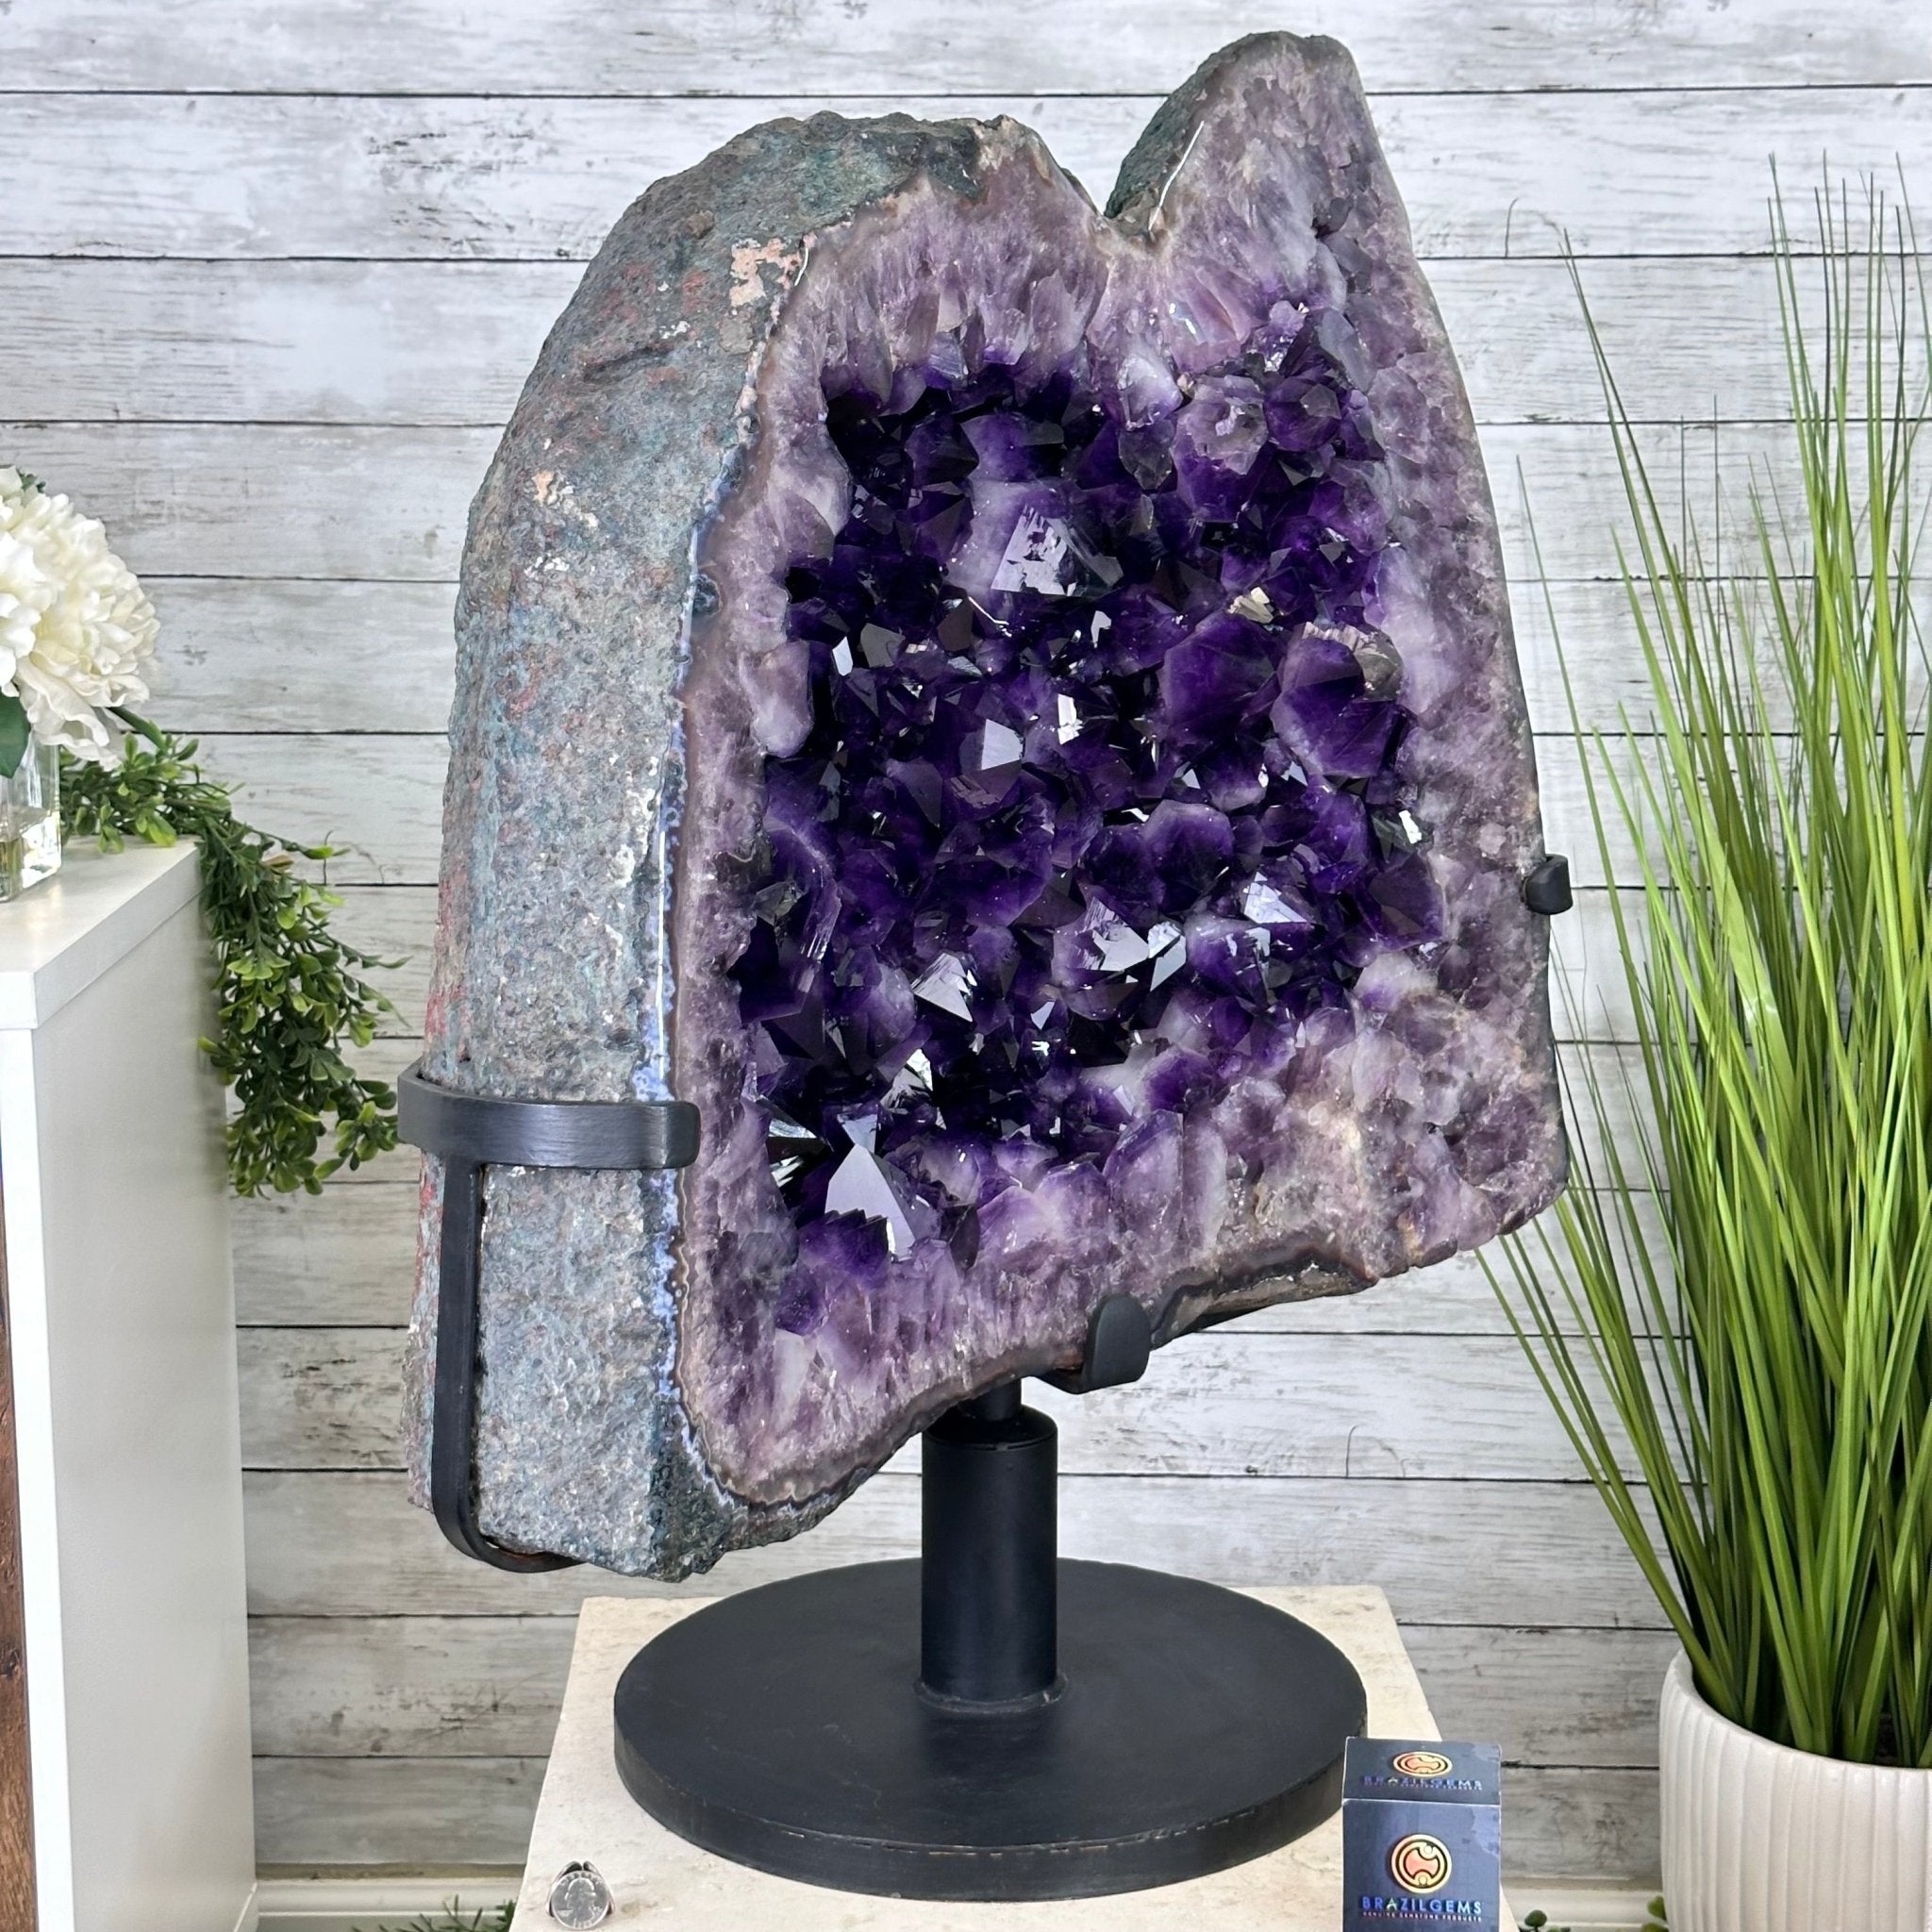 Super Quality Amethyst Cluster on Rotating Stand, 207 lbs & 31" Tall #5492-0033 - Brazil GemsBrazil GemsSuper Quality Amethyst Cluster on Rotating Stand, 207 lbs & 31" Tall #5492-0033Clusters on Rotating Bases5492-0033